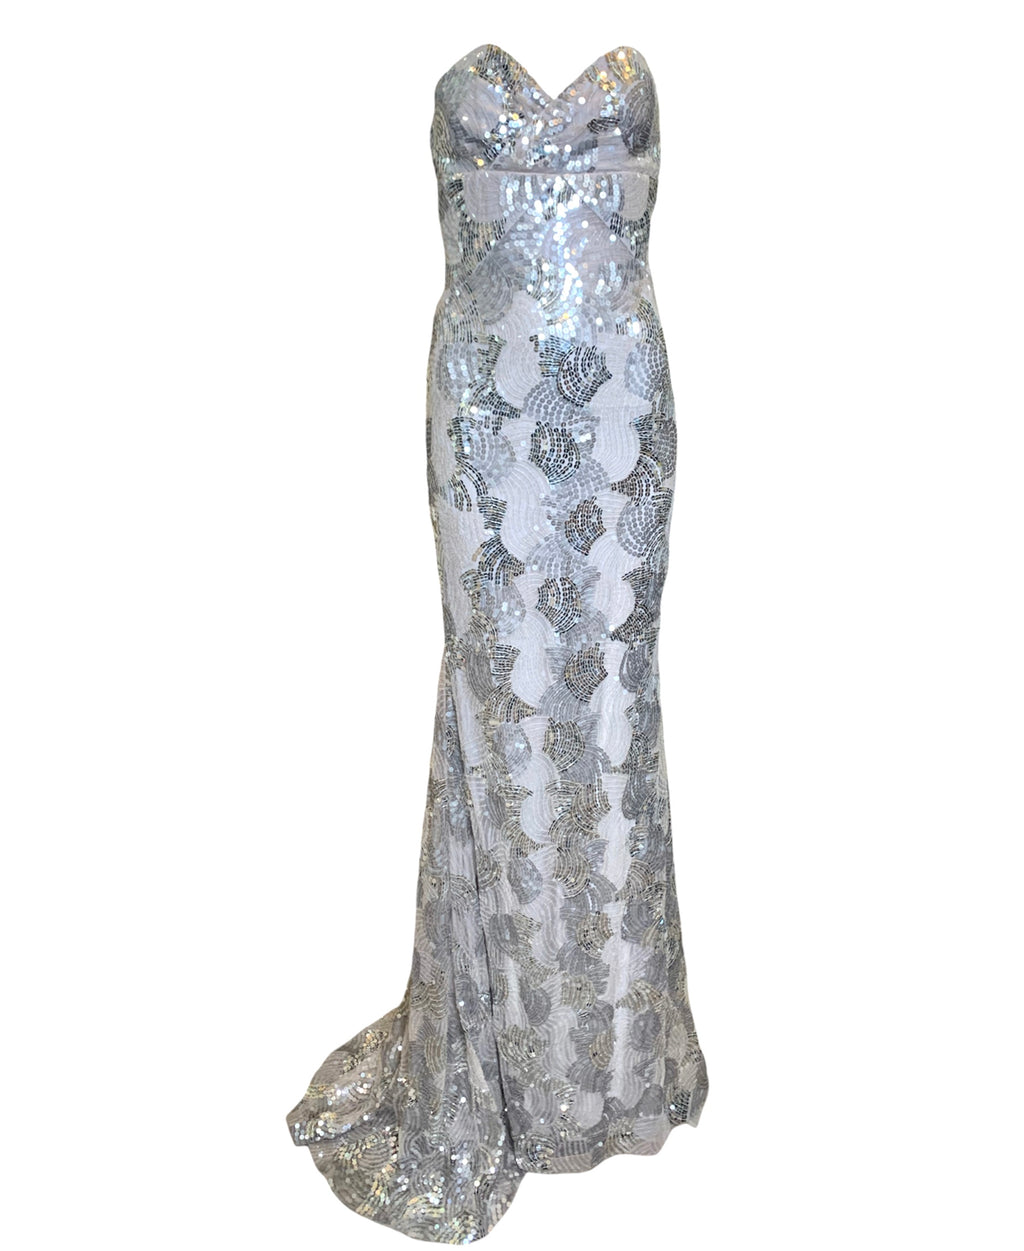 Lorena Sarbu Red Carpet Y2K Silver Sequin Strapless Gown FRONT 1 of 6